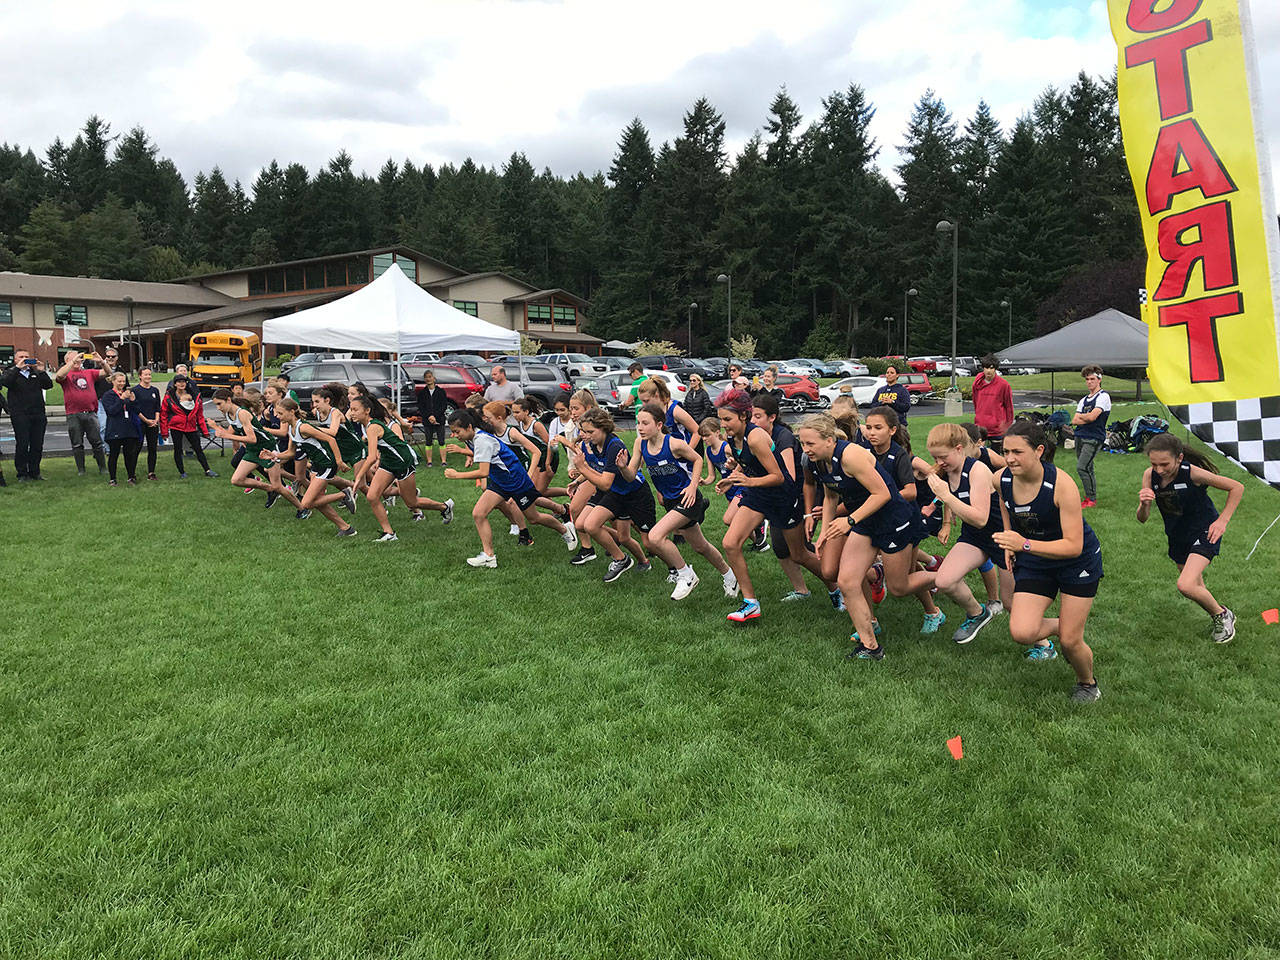 The girls leave the start line in the Sept. 17 meet at Charles Wright (Bruce Cyra Photo).